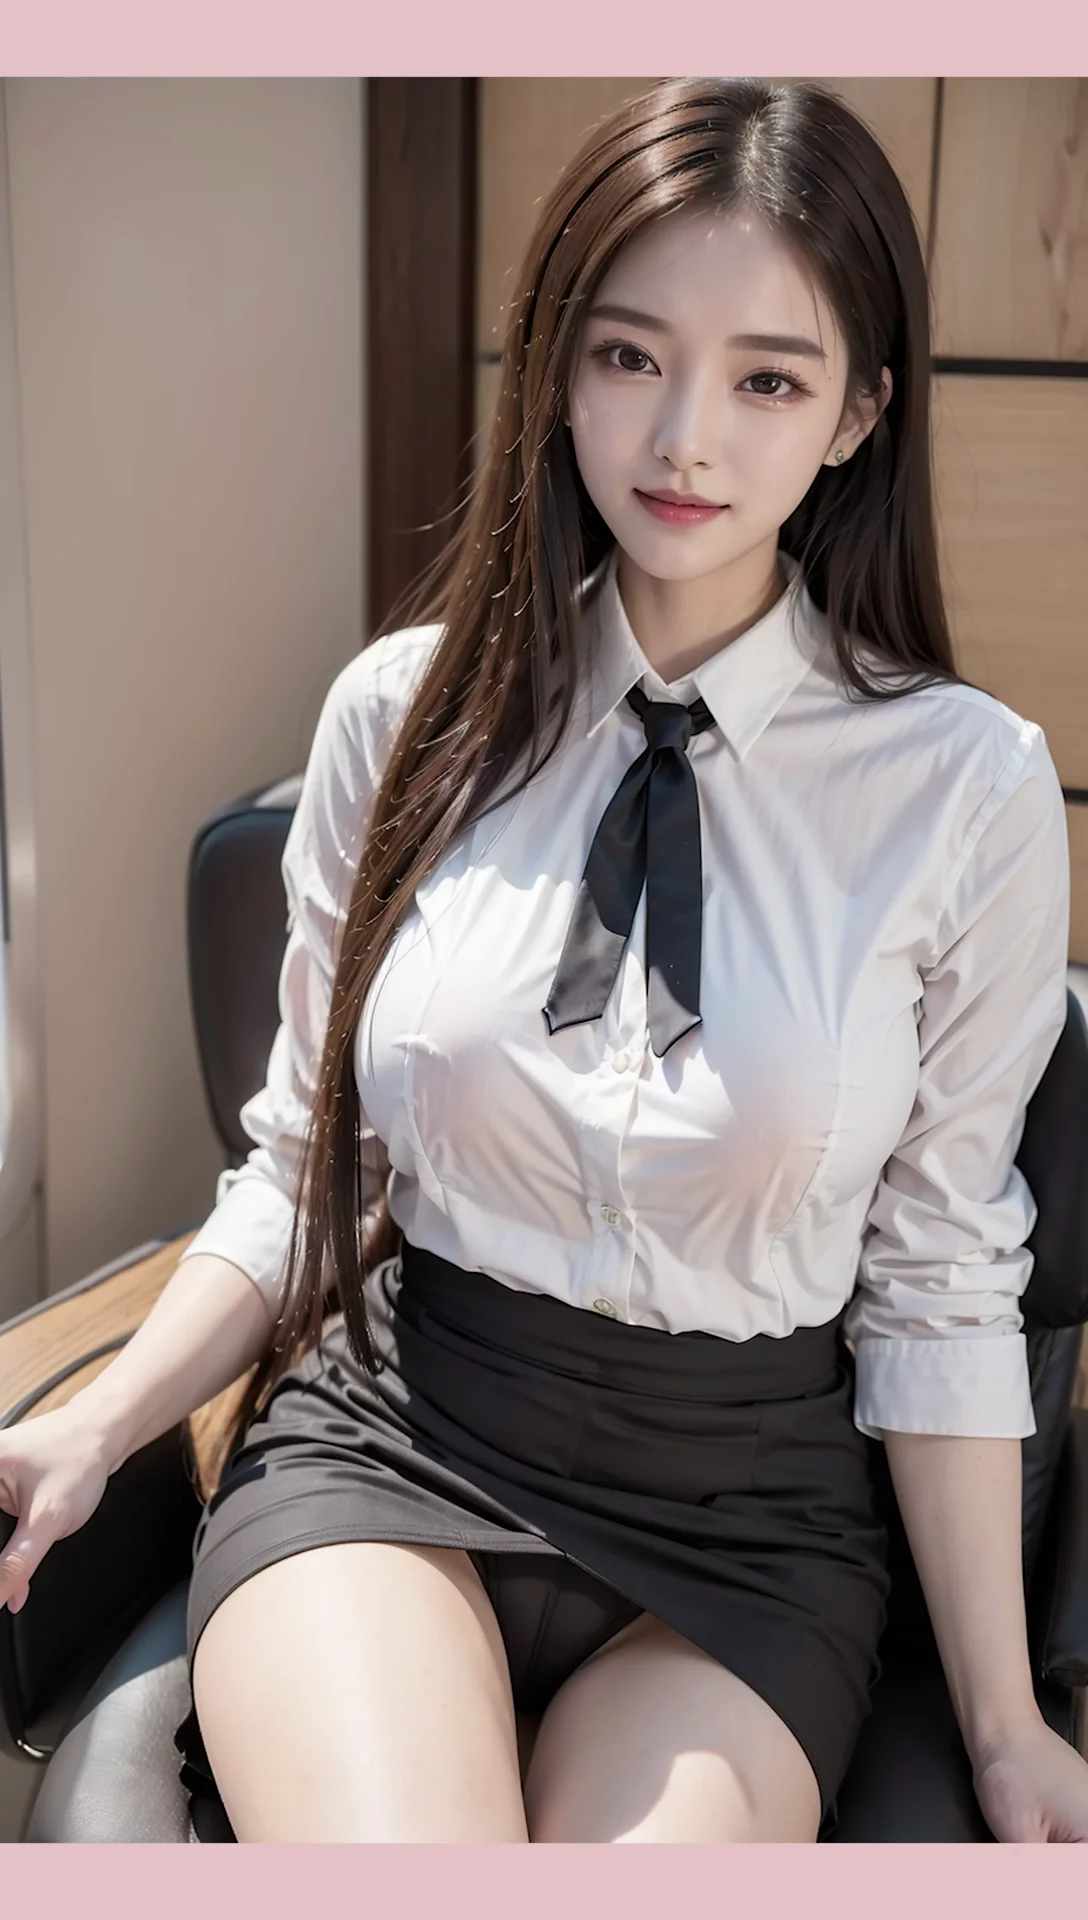 Ai Lookbook: Sexy Office Woman Images 34